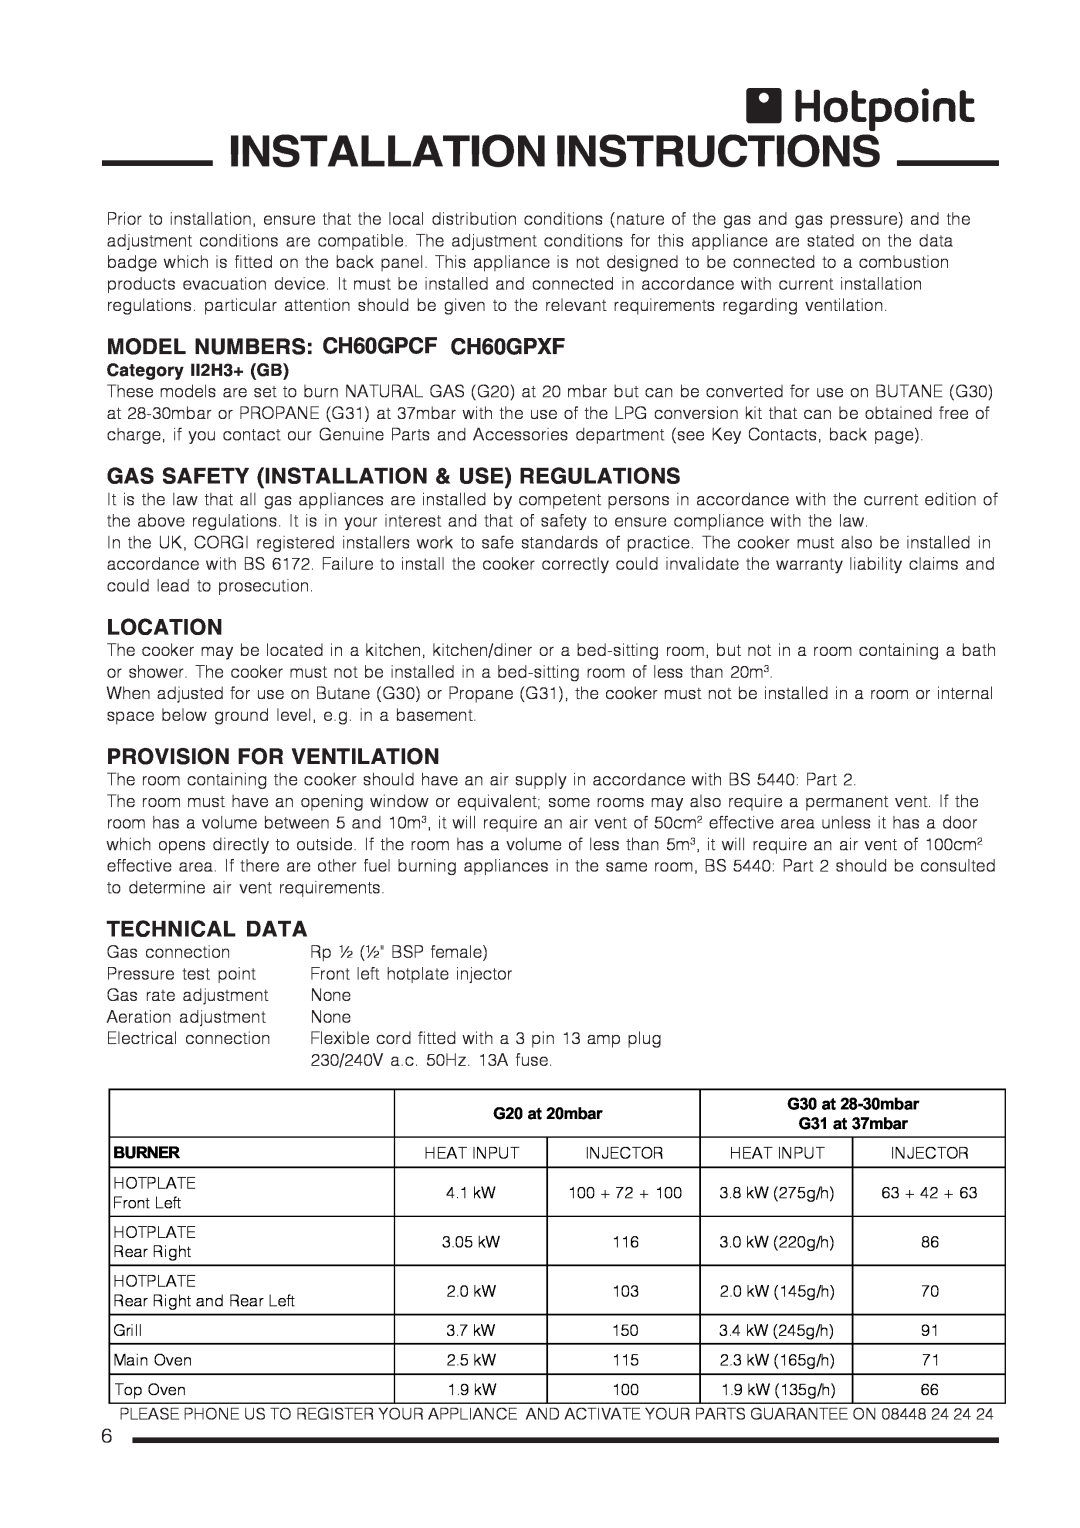 Hotpoint ch60gpcf Installation Instructions, MODEL NUMBERS CH60GPCF CH60GPXF, Gas Safety Installation & Use Regulations 